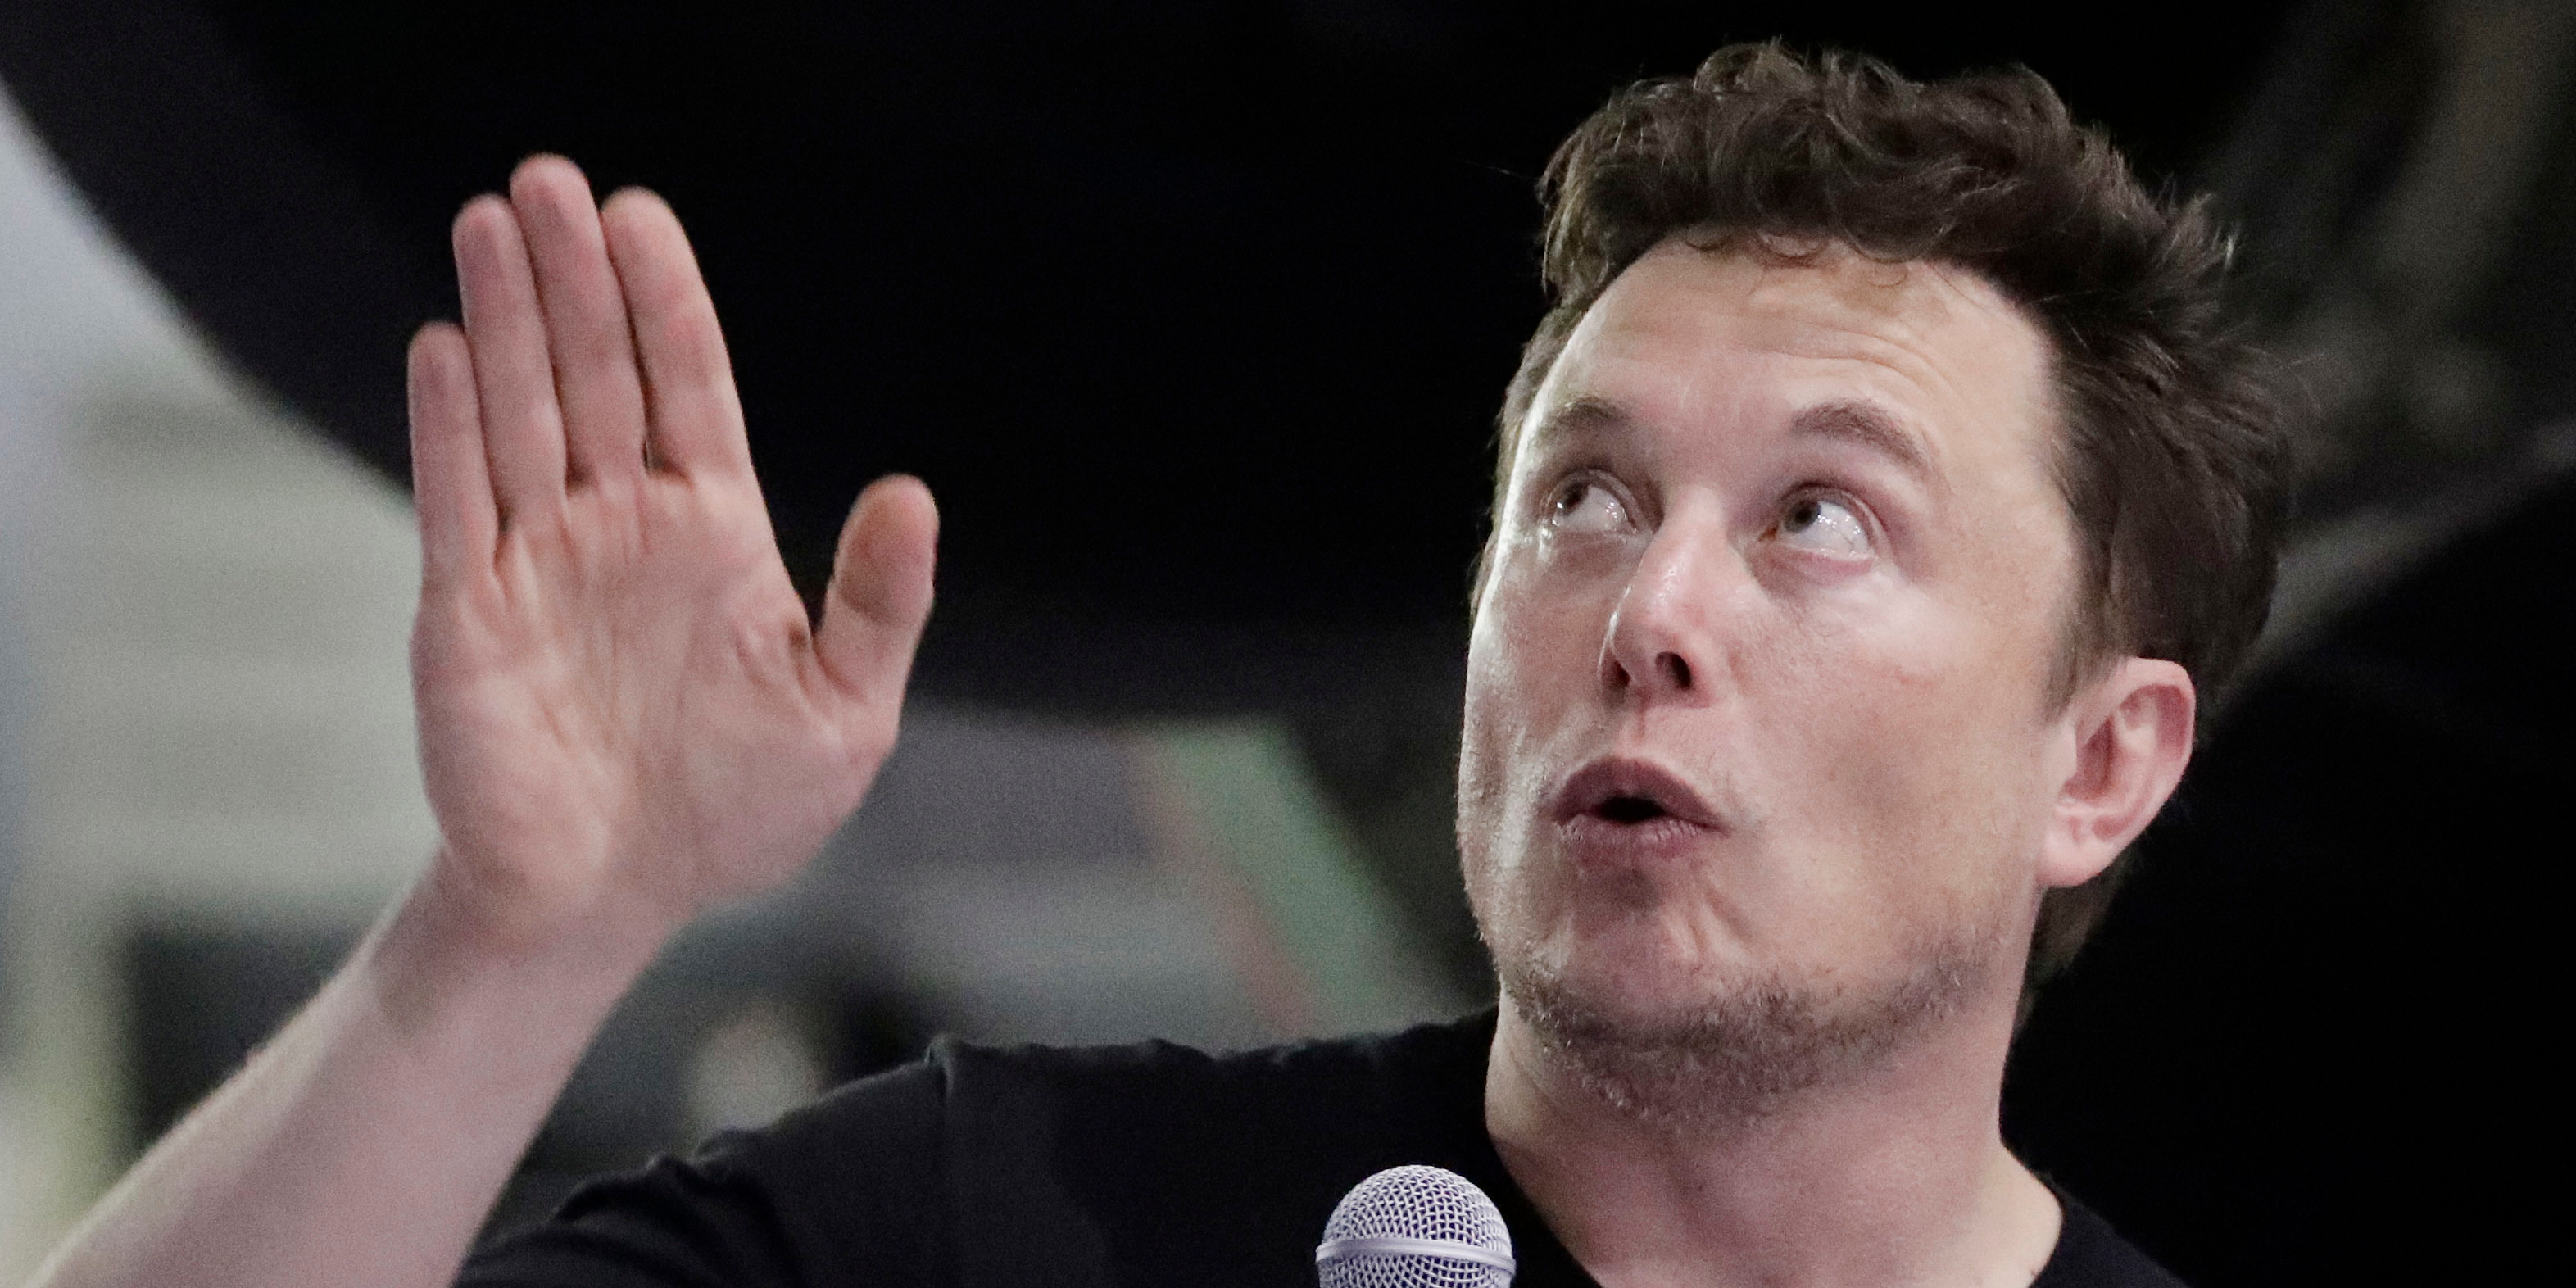 A famous hedge fund bought Tesla stock before it surged 91% this year. It potentially raked in over $1.5 billion from the bet.